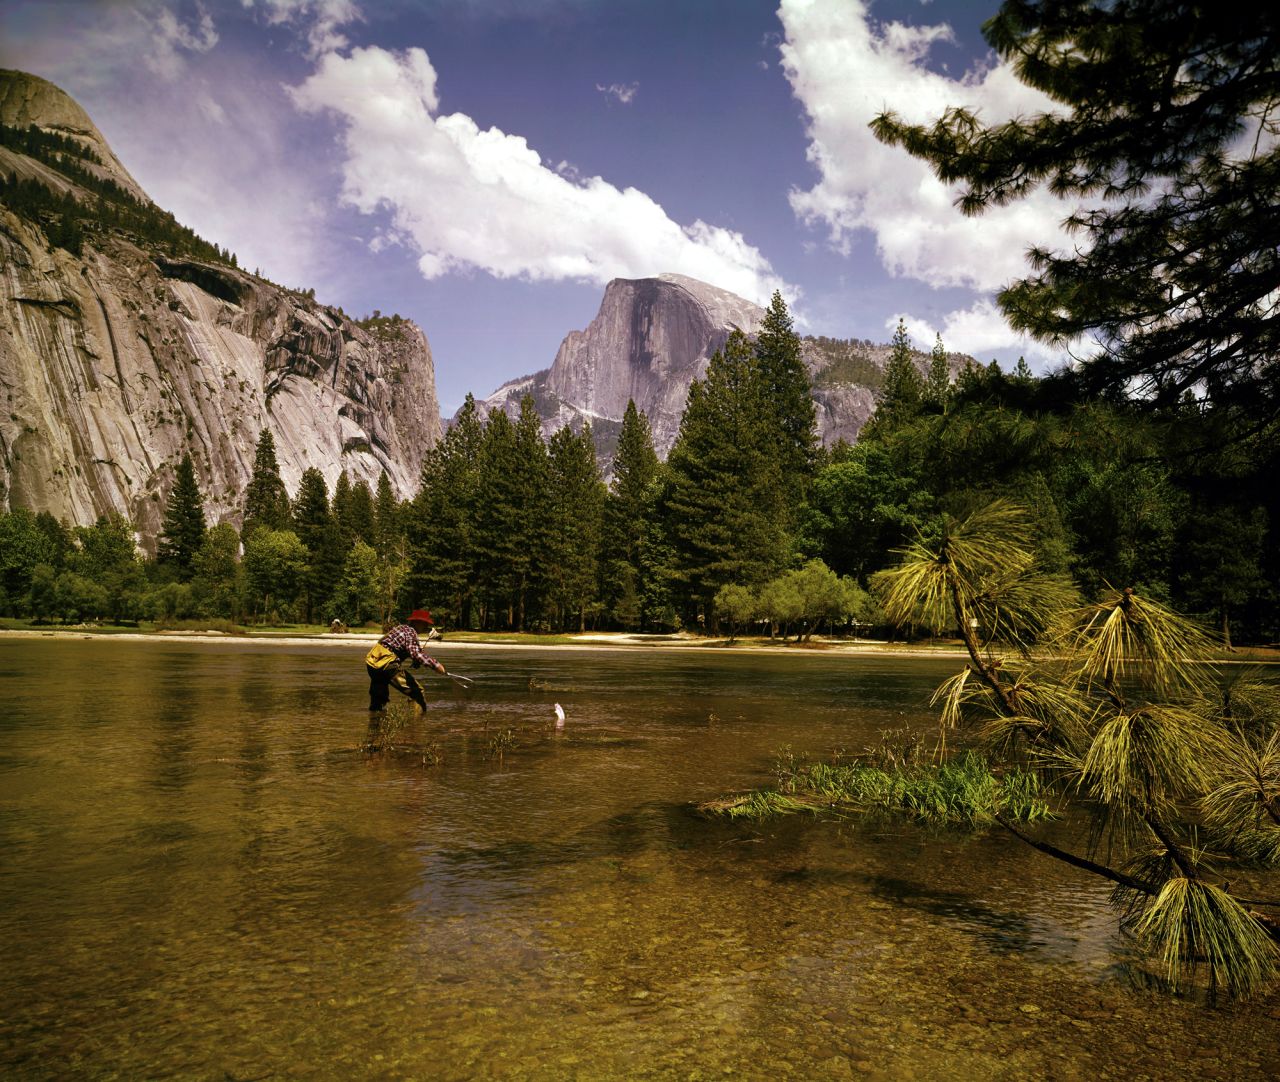 Yosemite and other national parks offer a scenic getaway.